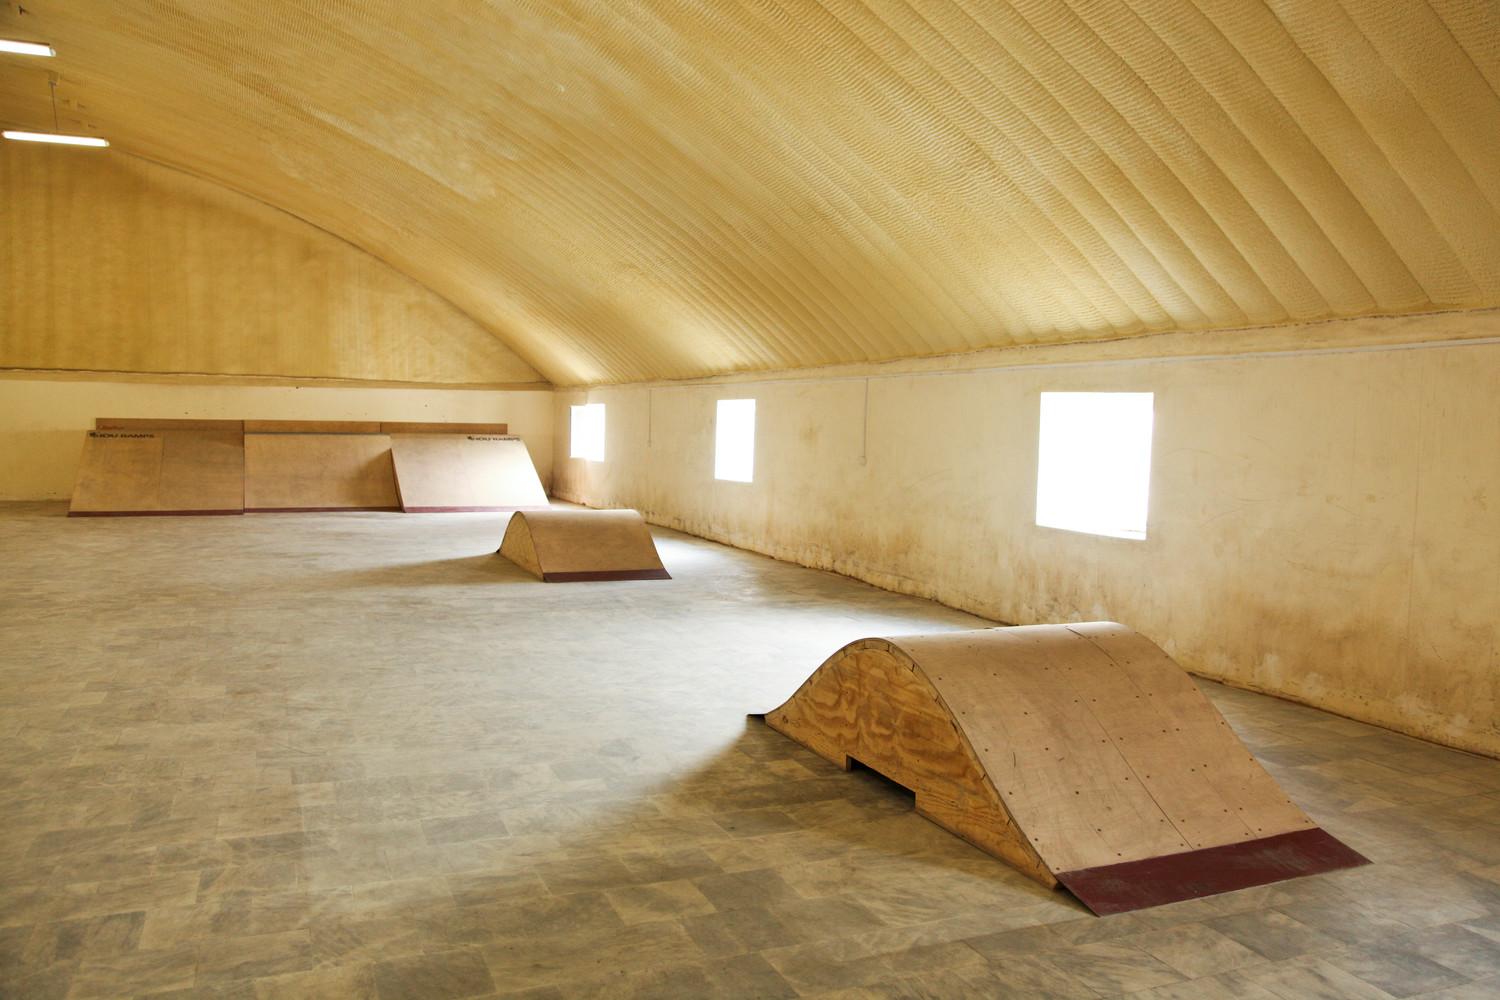 Internal view of skateboarding ramps and side windows